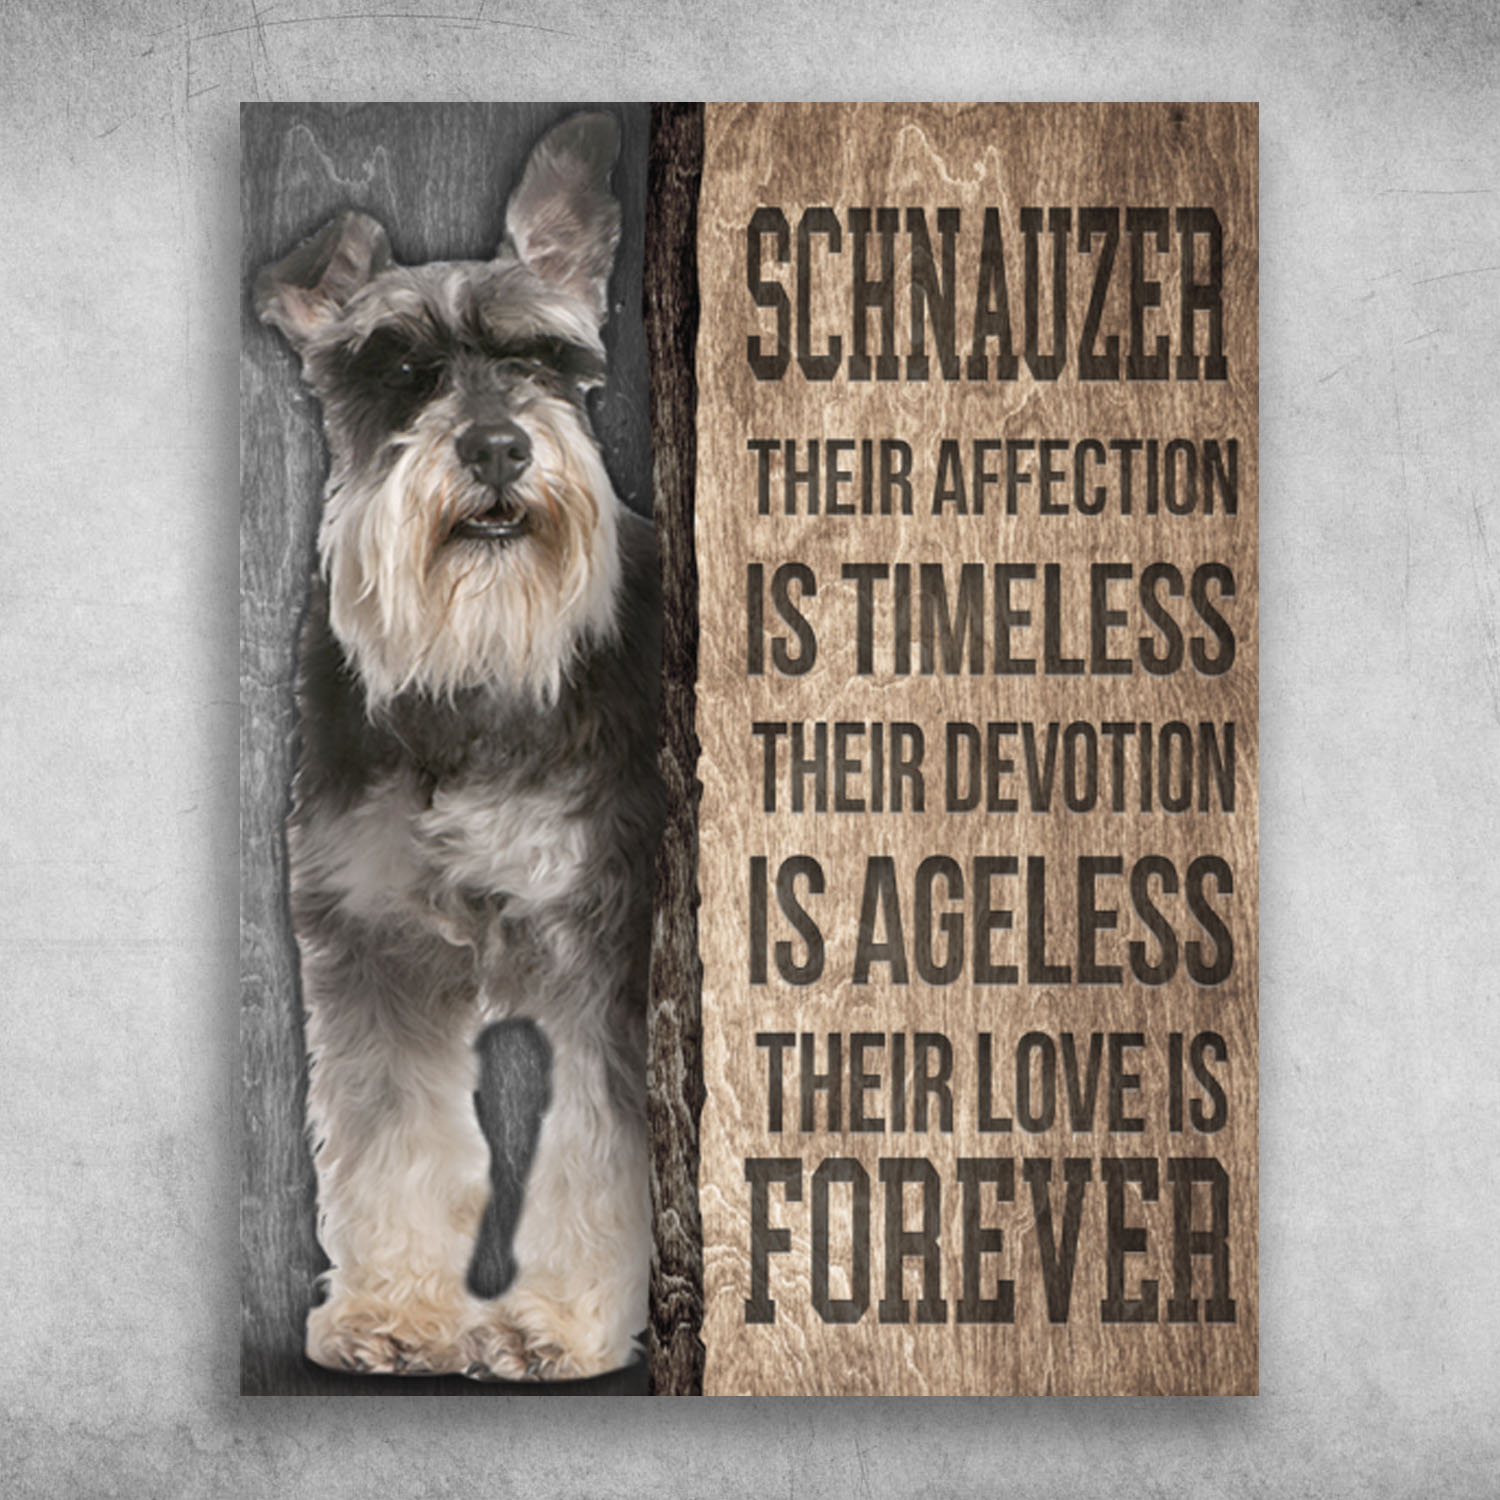 Schnauzer Their Devotion Is Ageless Their Love is Forever